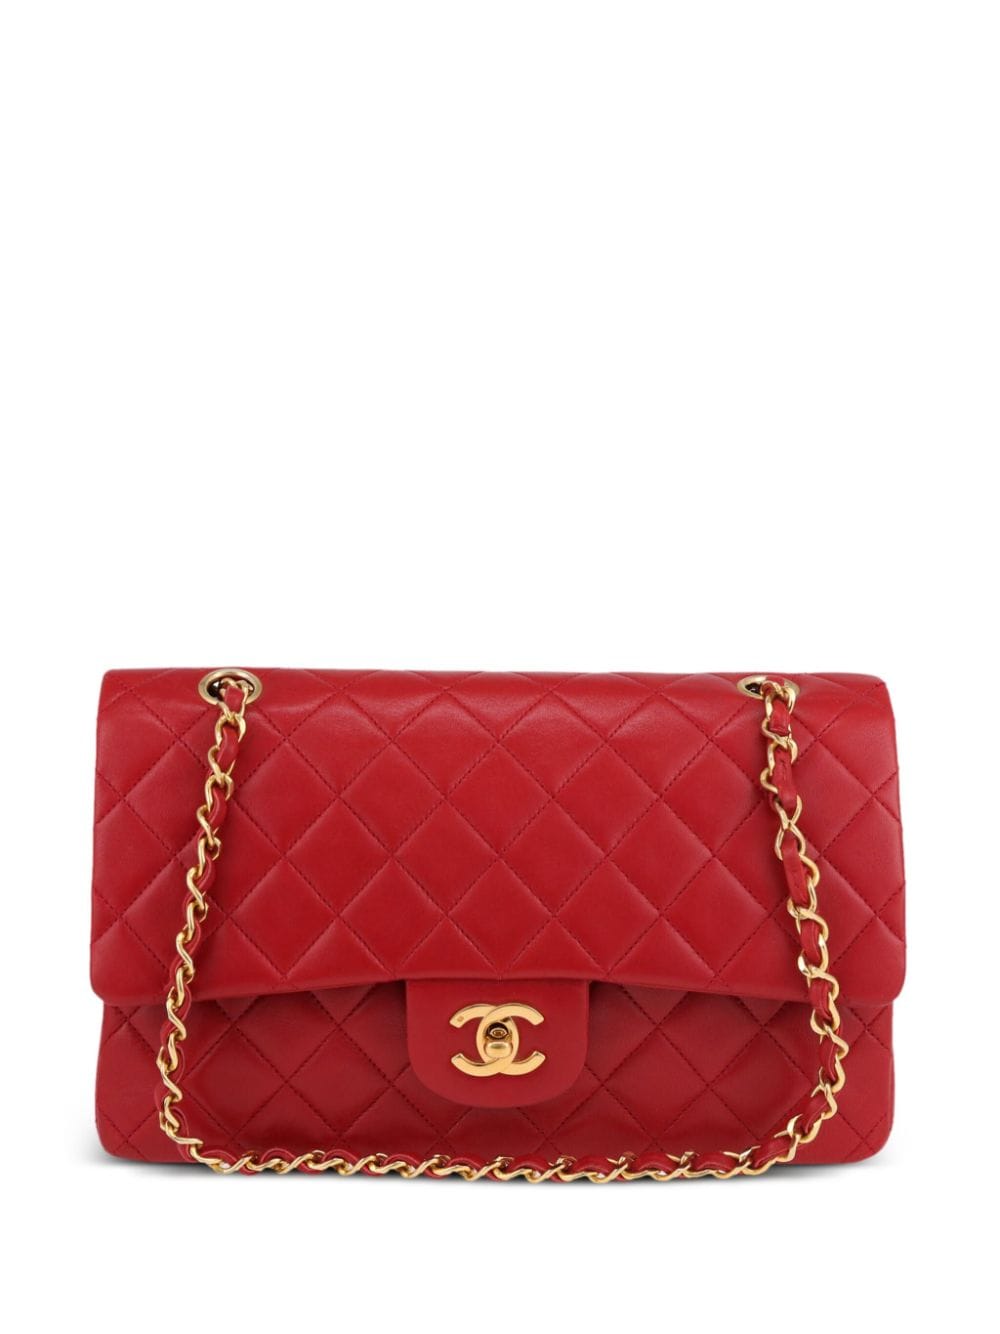 CHANEL Pre-Owned Timeless Quilted Shoulder Bag - Farfetch